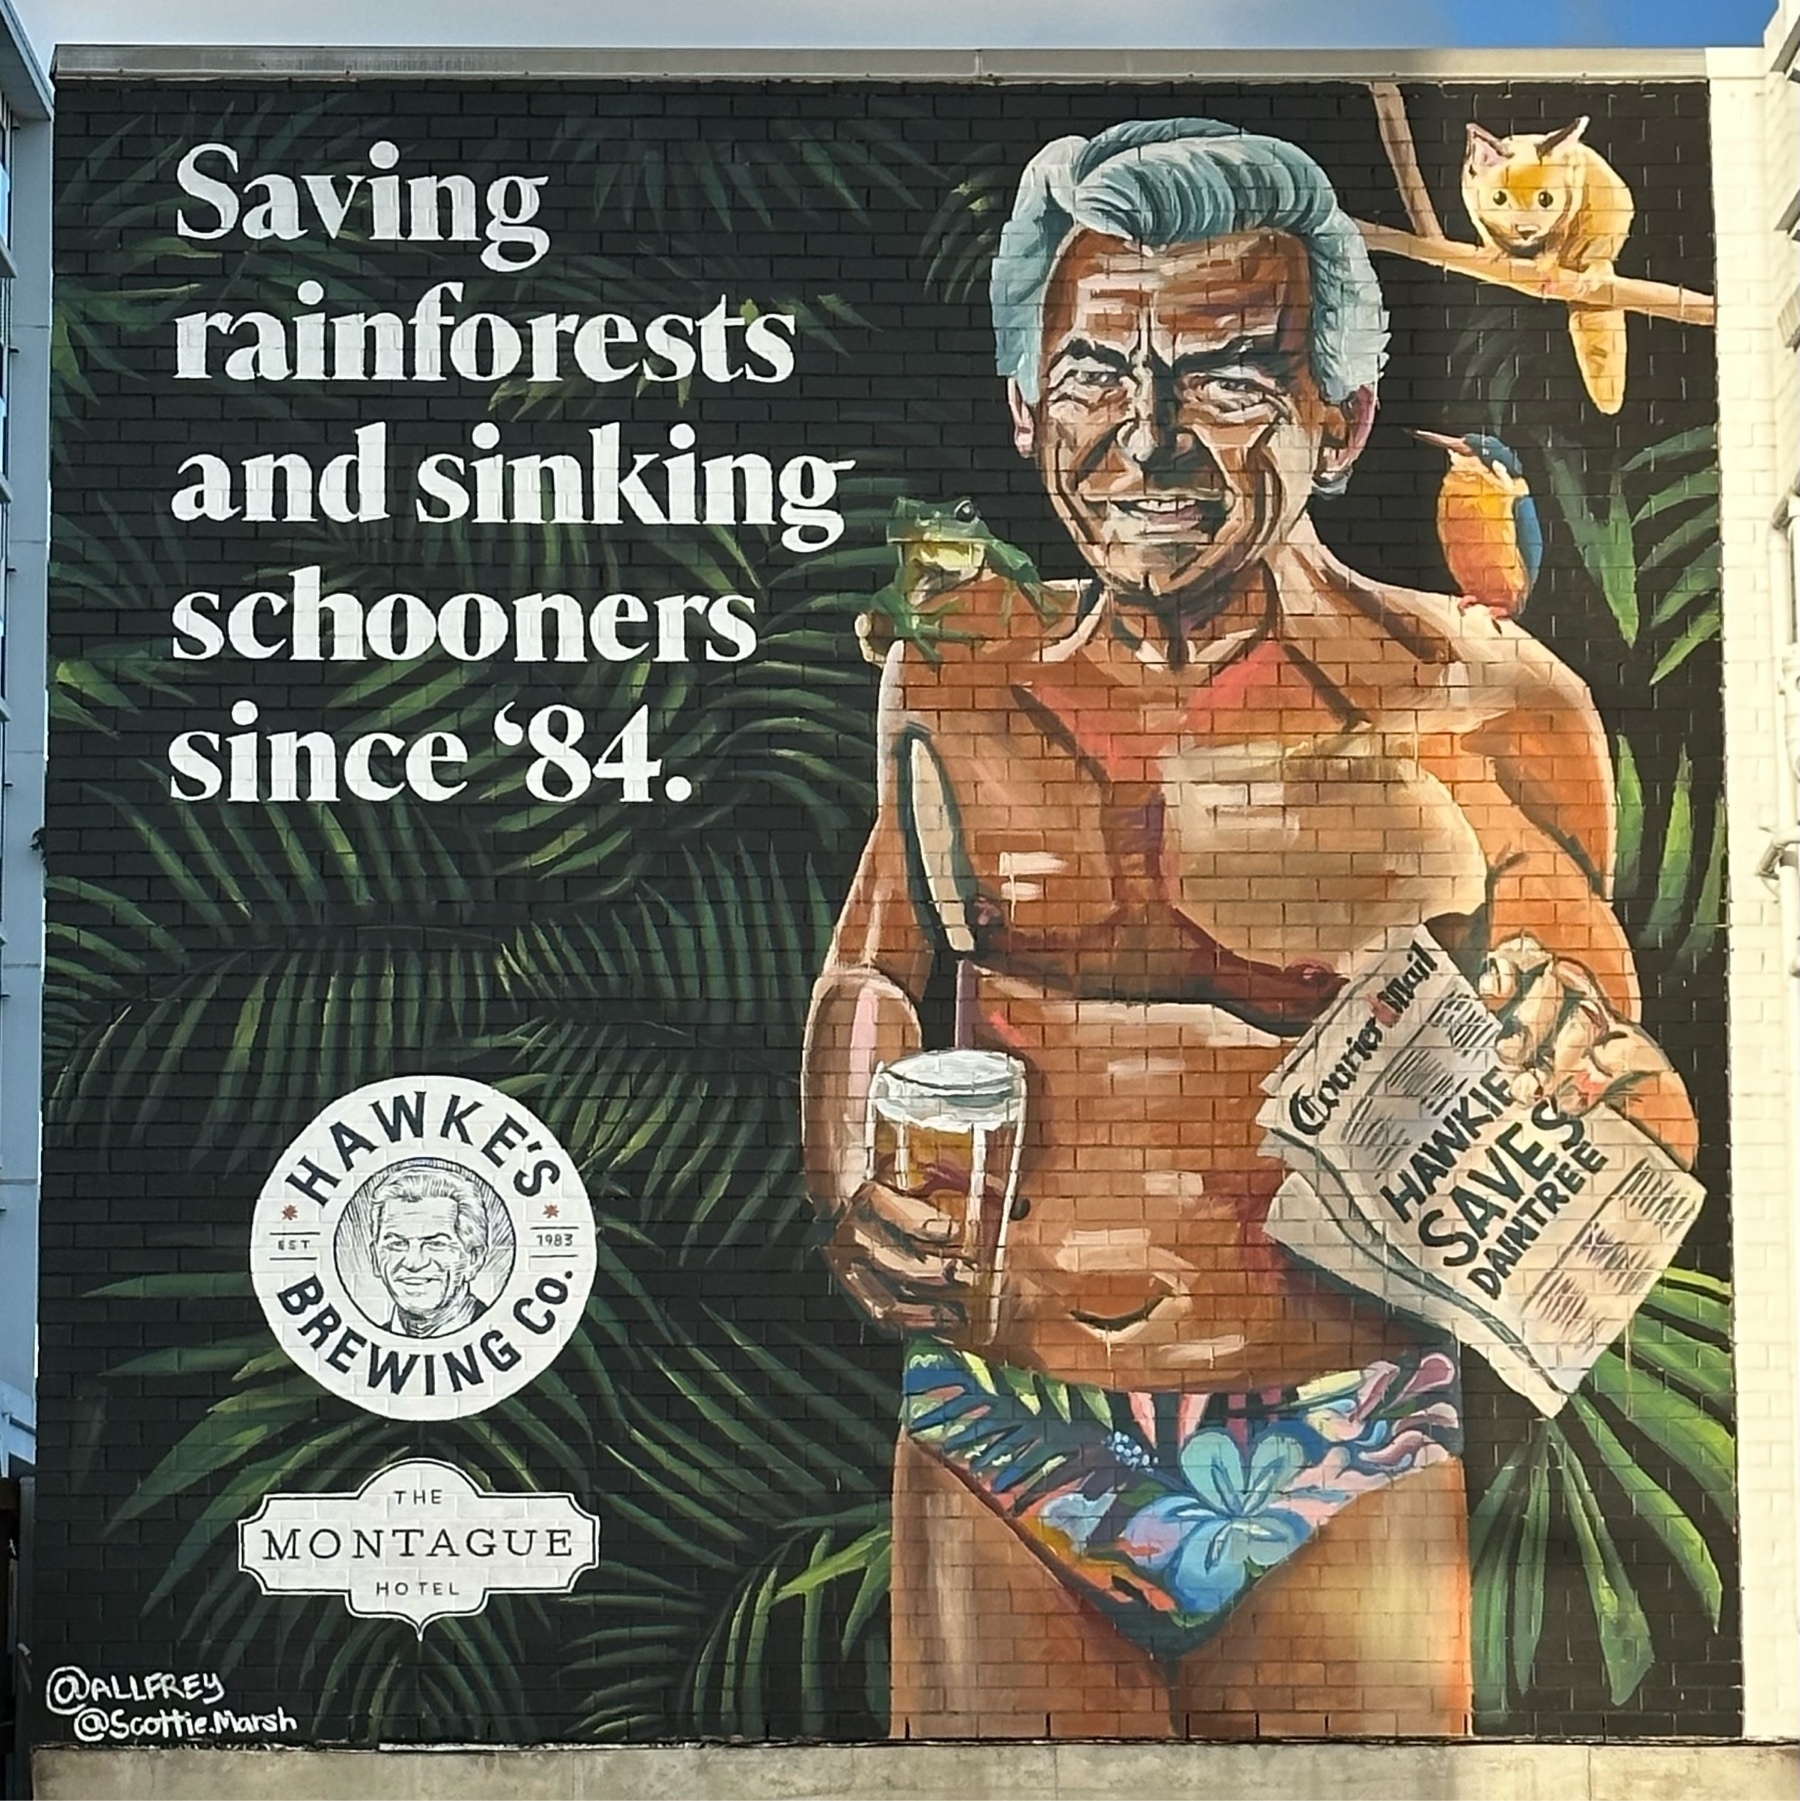 Advertising for Hawke’s Brewing painted on a brick wall. Top left says “Saving rainforests and sinking schooners since ‘84.” Bottom left has the company logo and “Montague Hotel”. The right half has former Australian prime minister Bob Hawke in speedos, holding a beer and newspaper a bird and frog on either shoulder and a possum on a branch behind him.